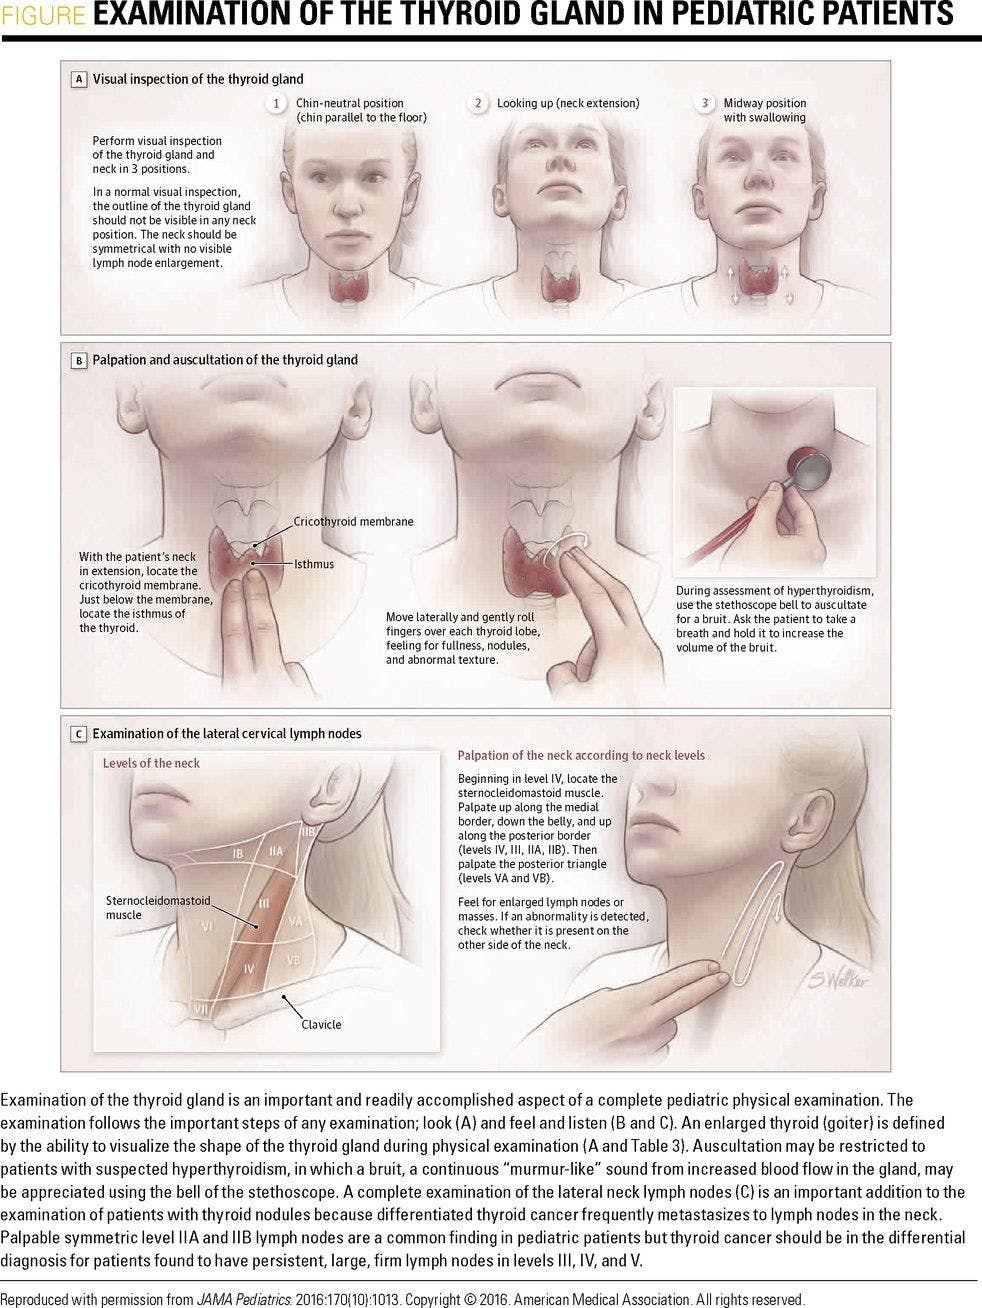 Examination of the thyroid gland in pediatric patients